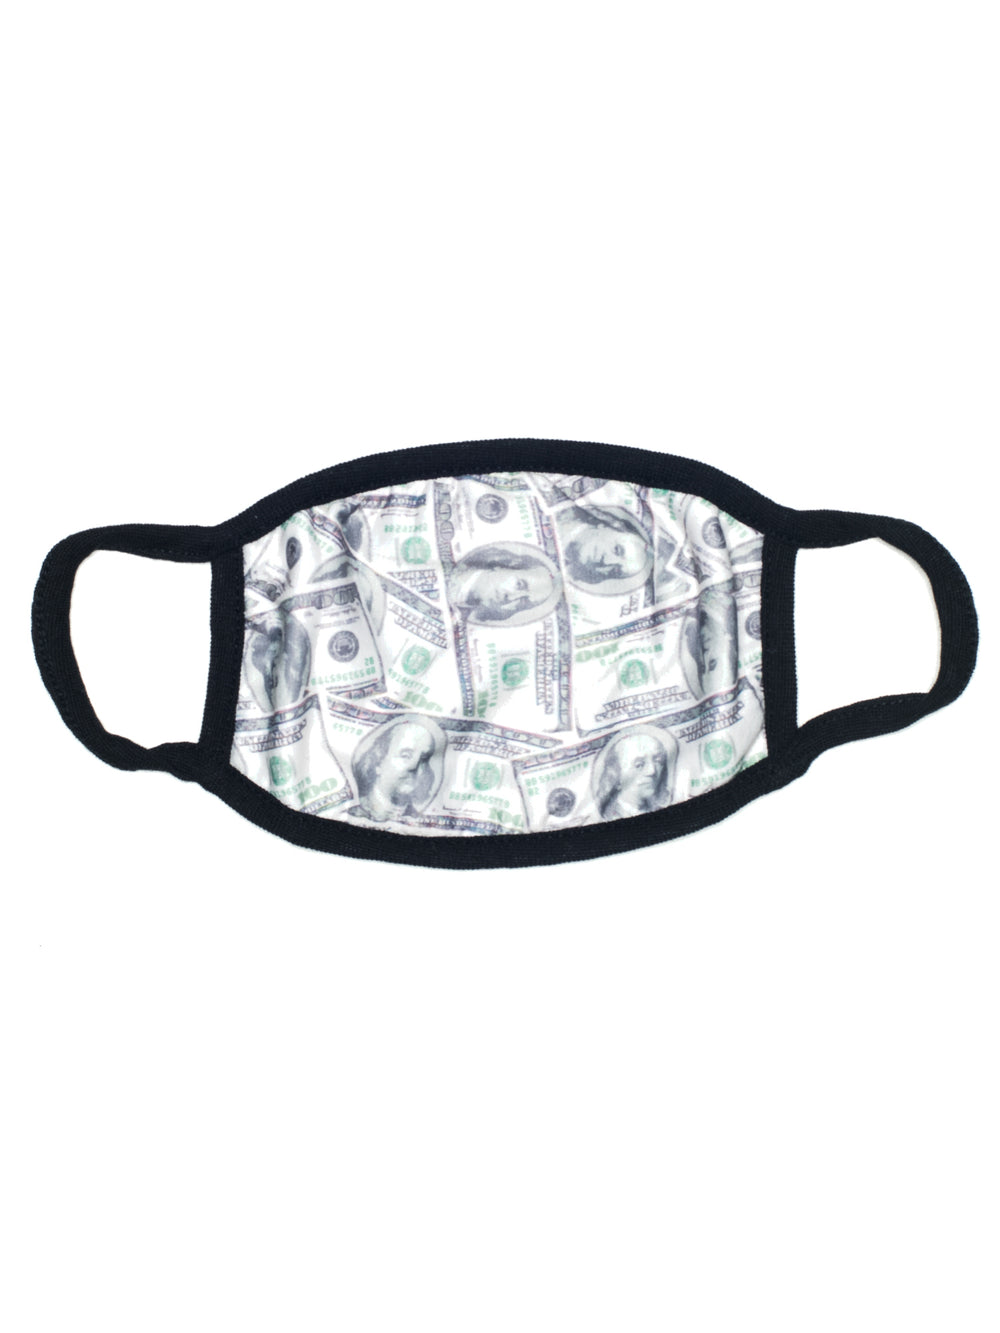 WHATEVER COMPANY MONEY MASK - CLEARANCE